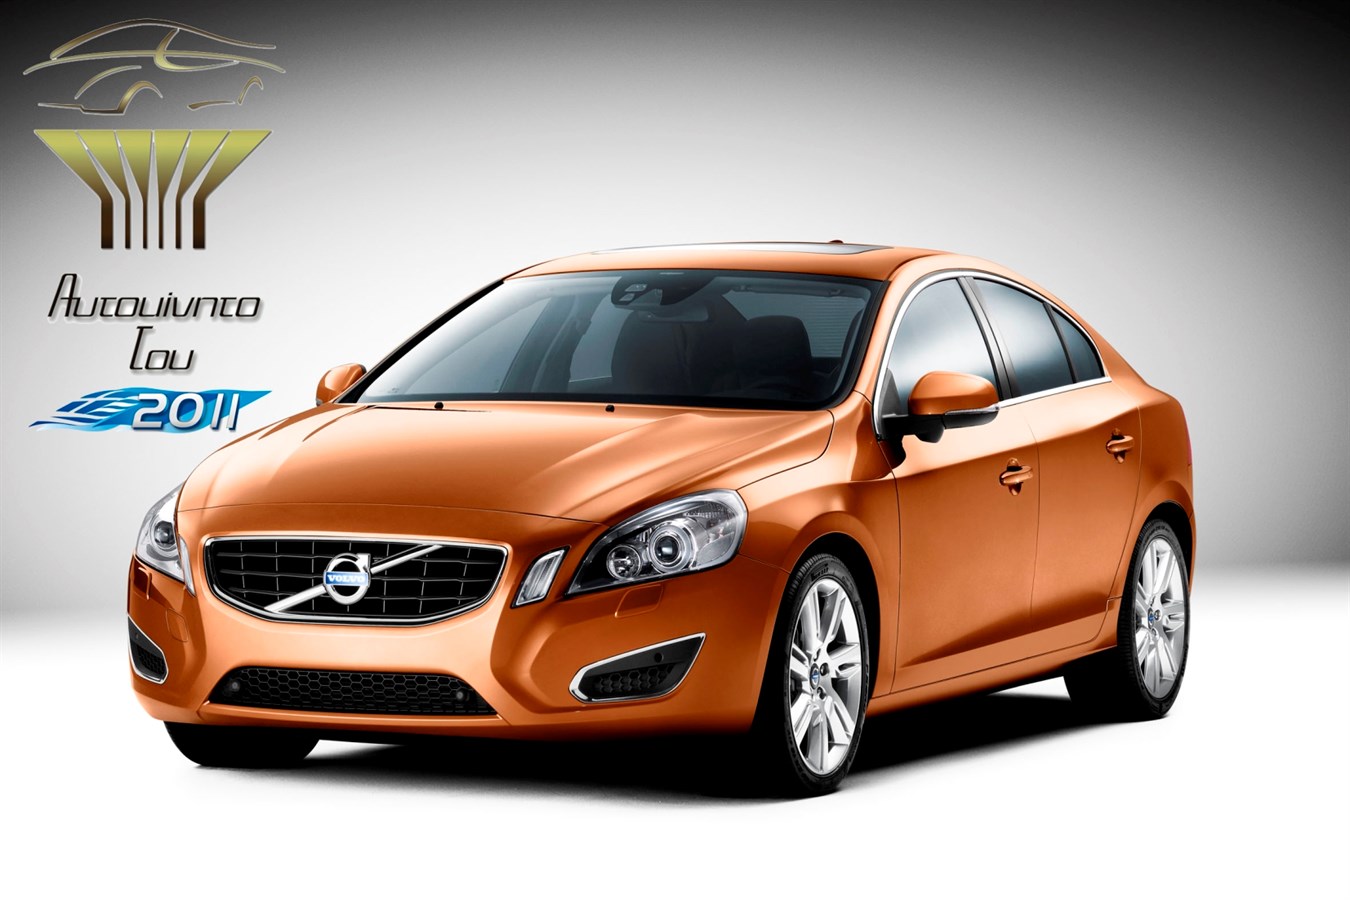 Volvo S60 has been voted "Car of the Year 2011" Greece. Logotype and S60